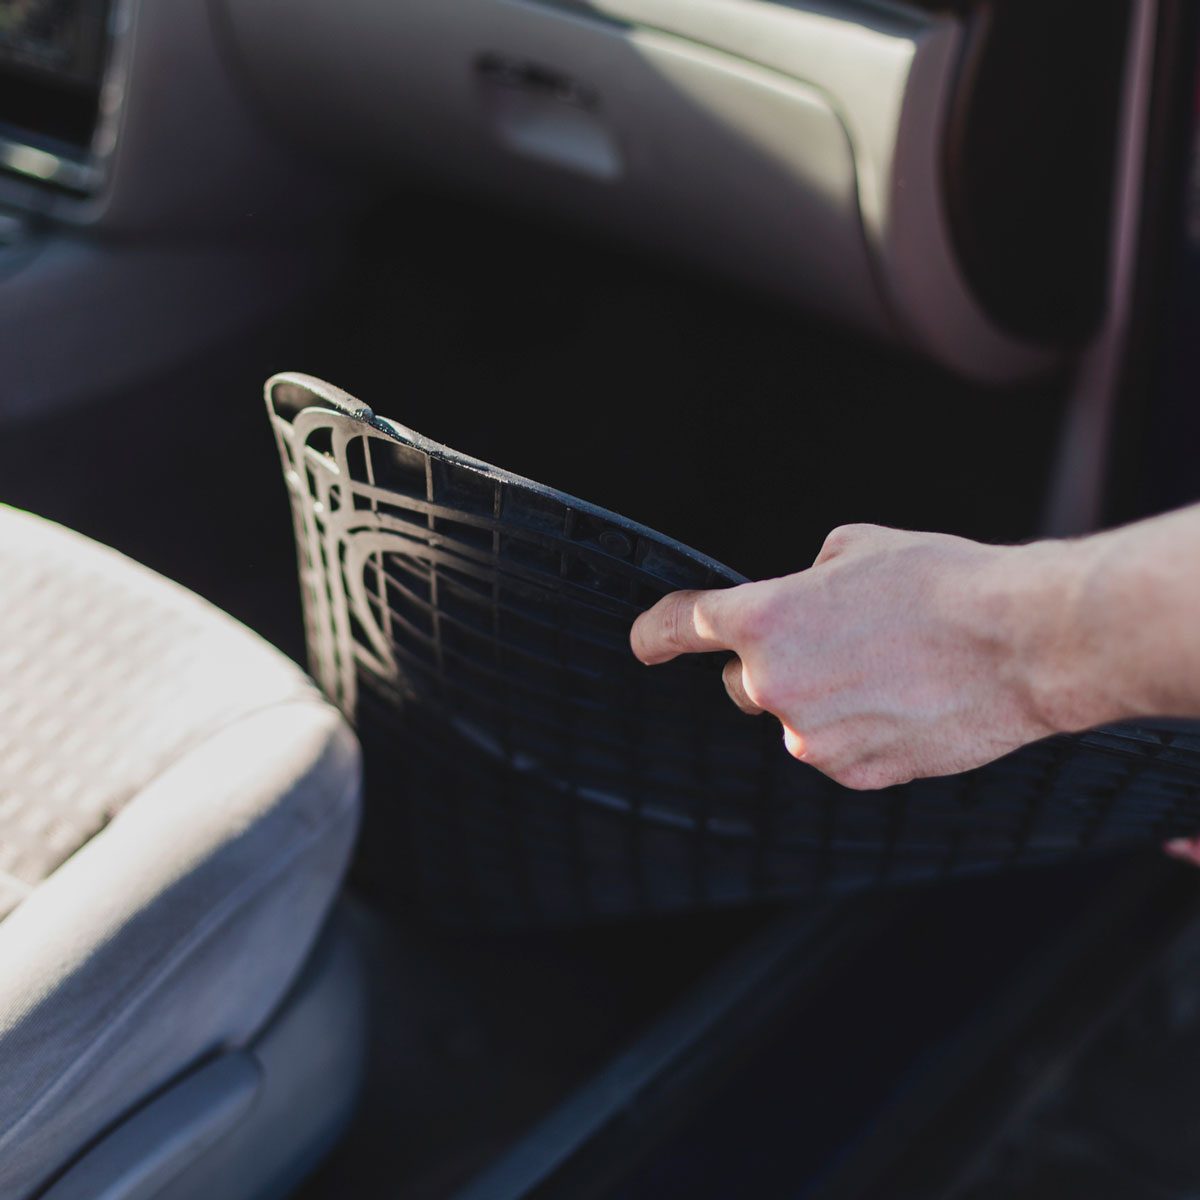 The Easiest Way to Clean Your Car's Carpet Is Here